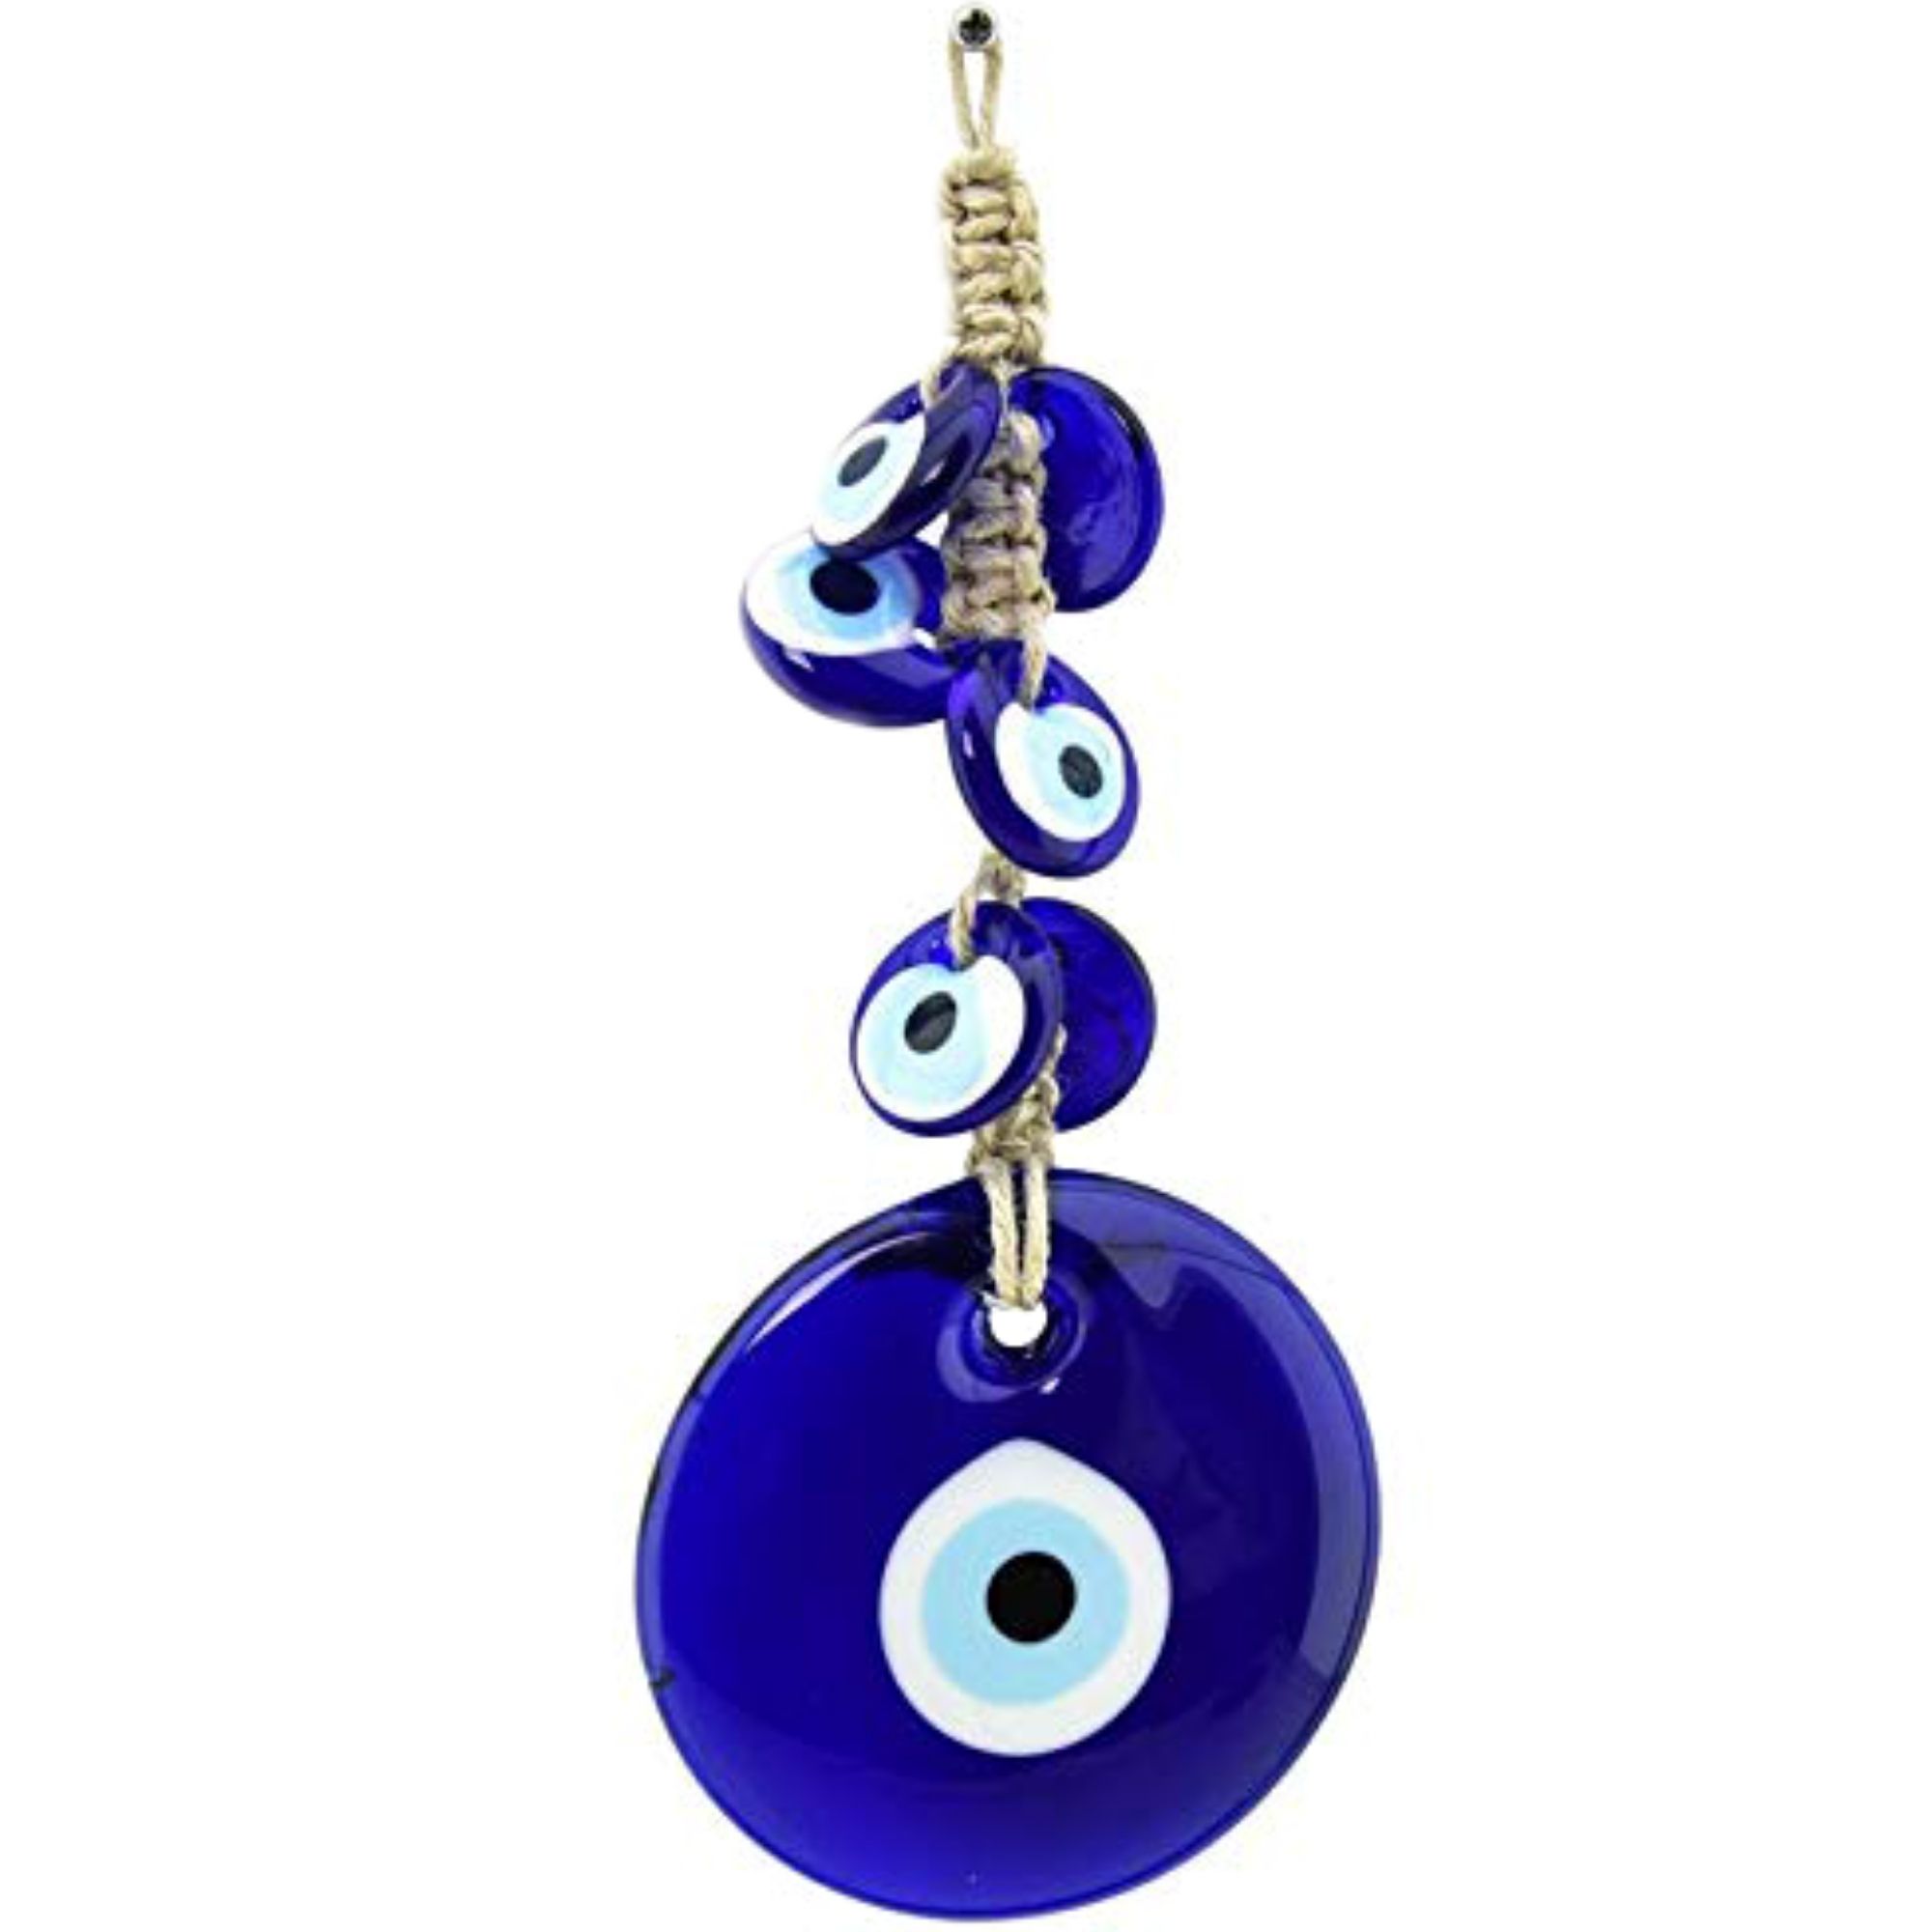 Turkish Nazar Bead Amulet Protection and Good Luck Charm Gift Silver Metal Home Decor Erbulus Seven Elephants Glass Turkish Blue Evil Eye Wall Hanging Ornament